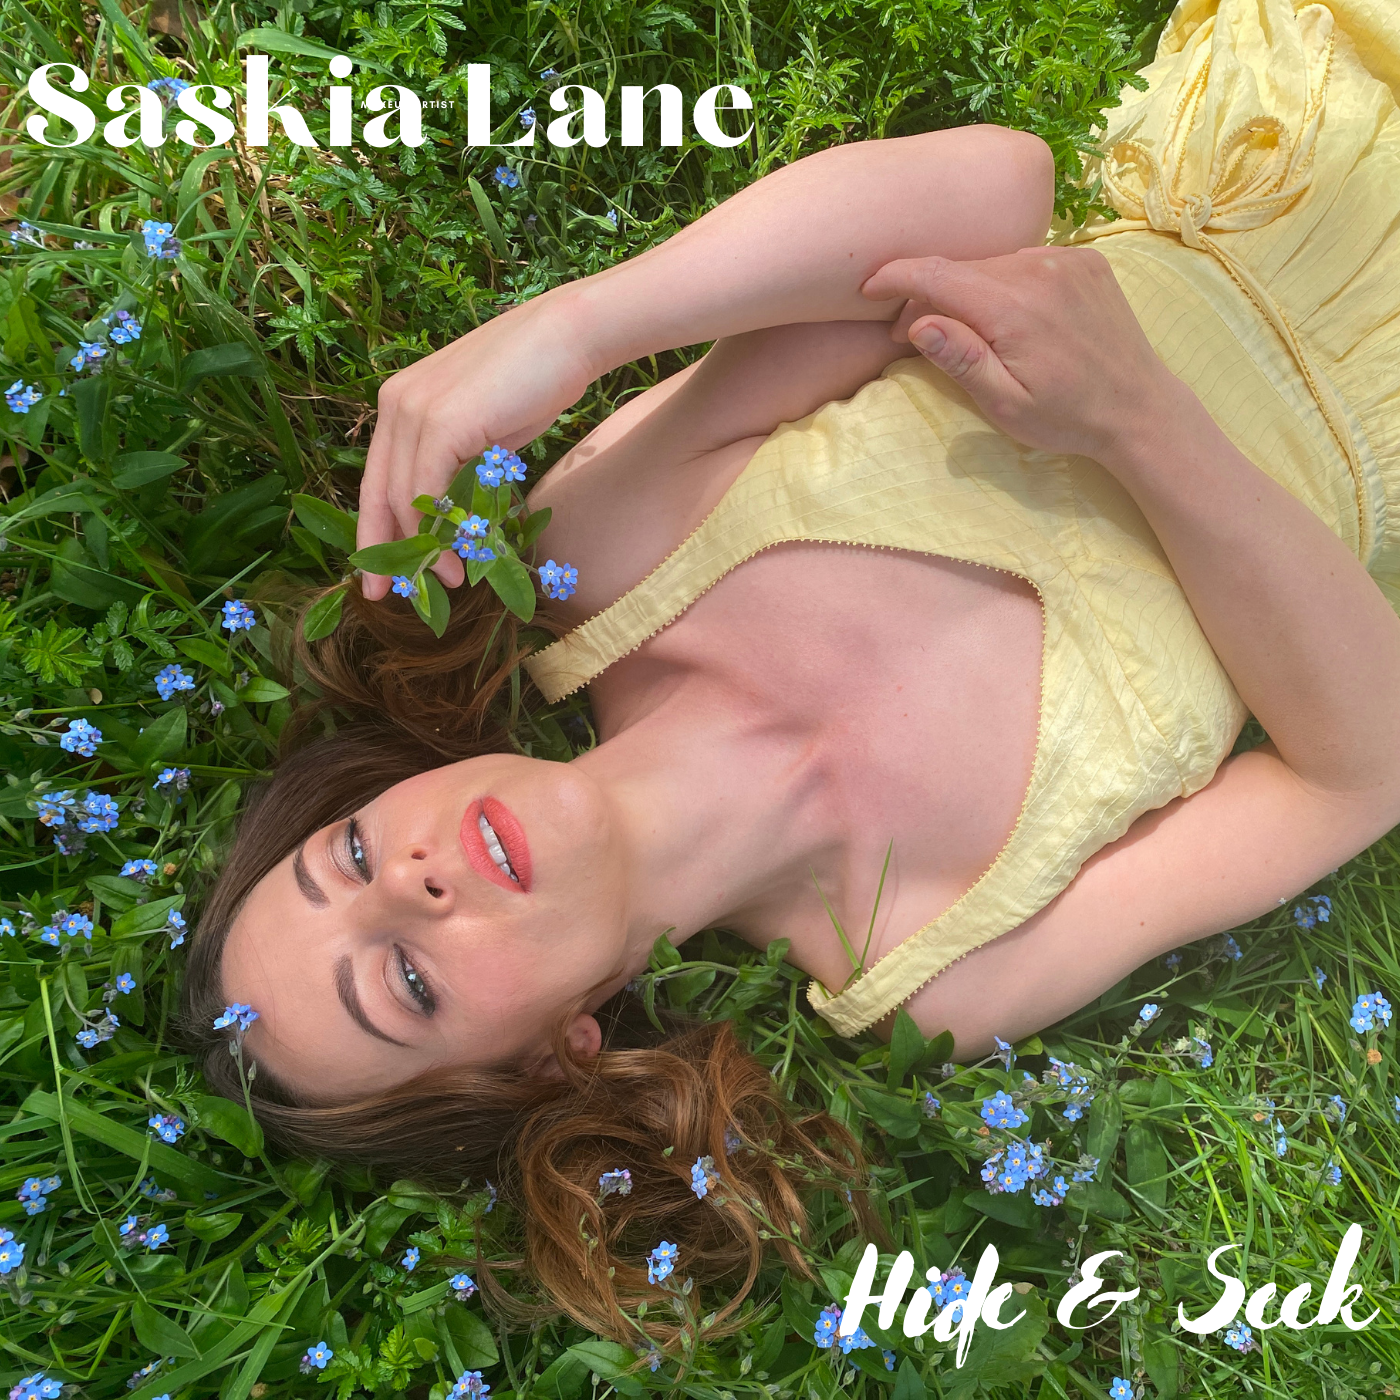 SASKIA LANE  EMPOWERED TO EMPOWER WITH DEBUT SINGLE ‘HIDE & SEEK’  OUT NOW!